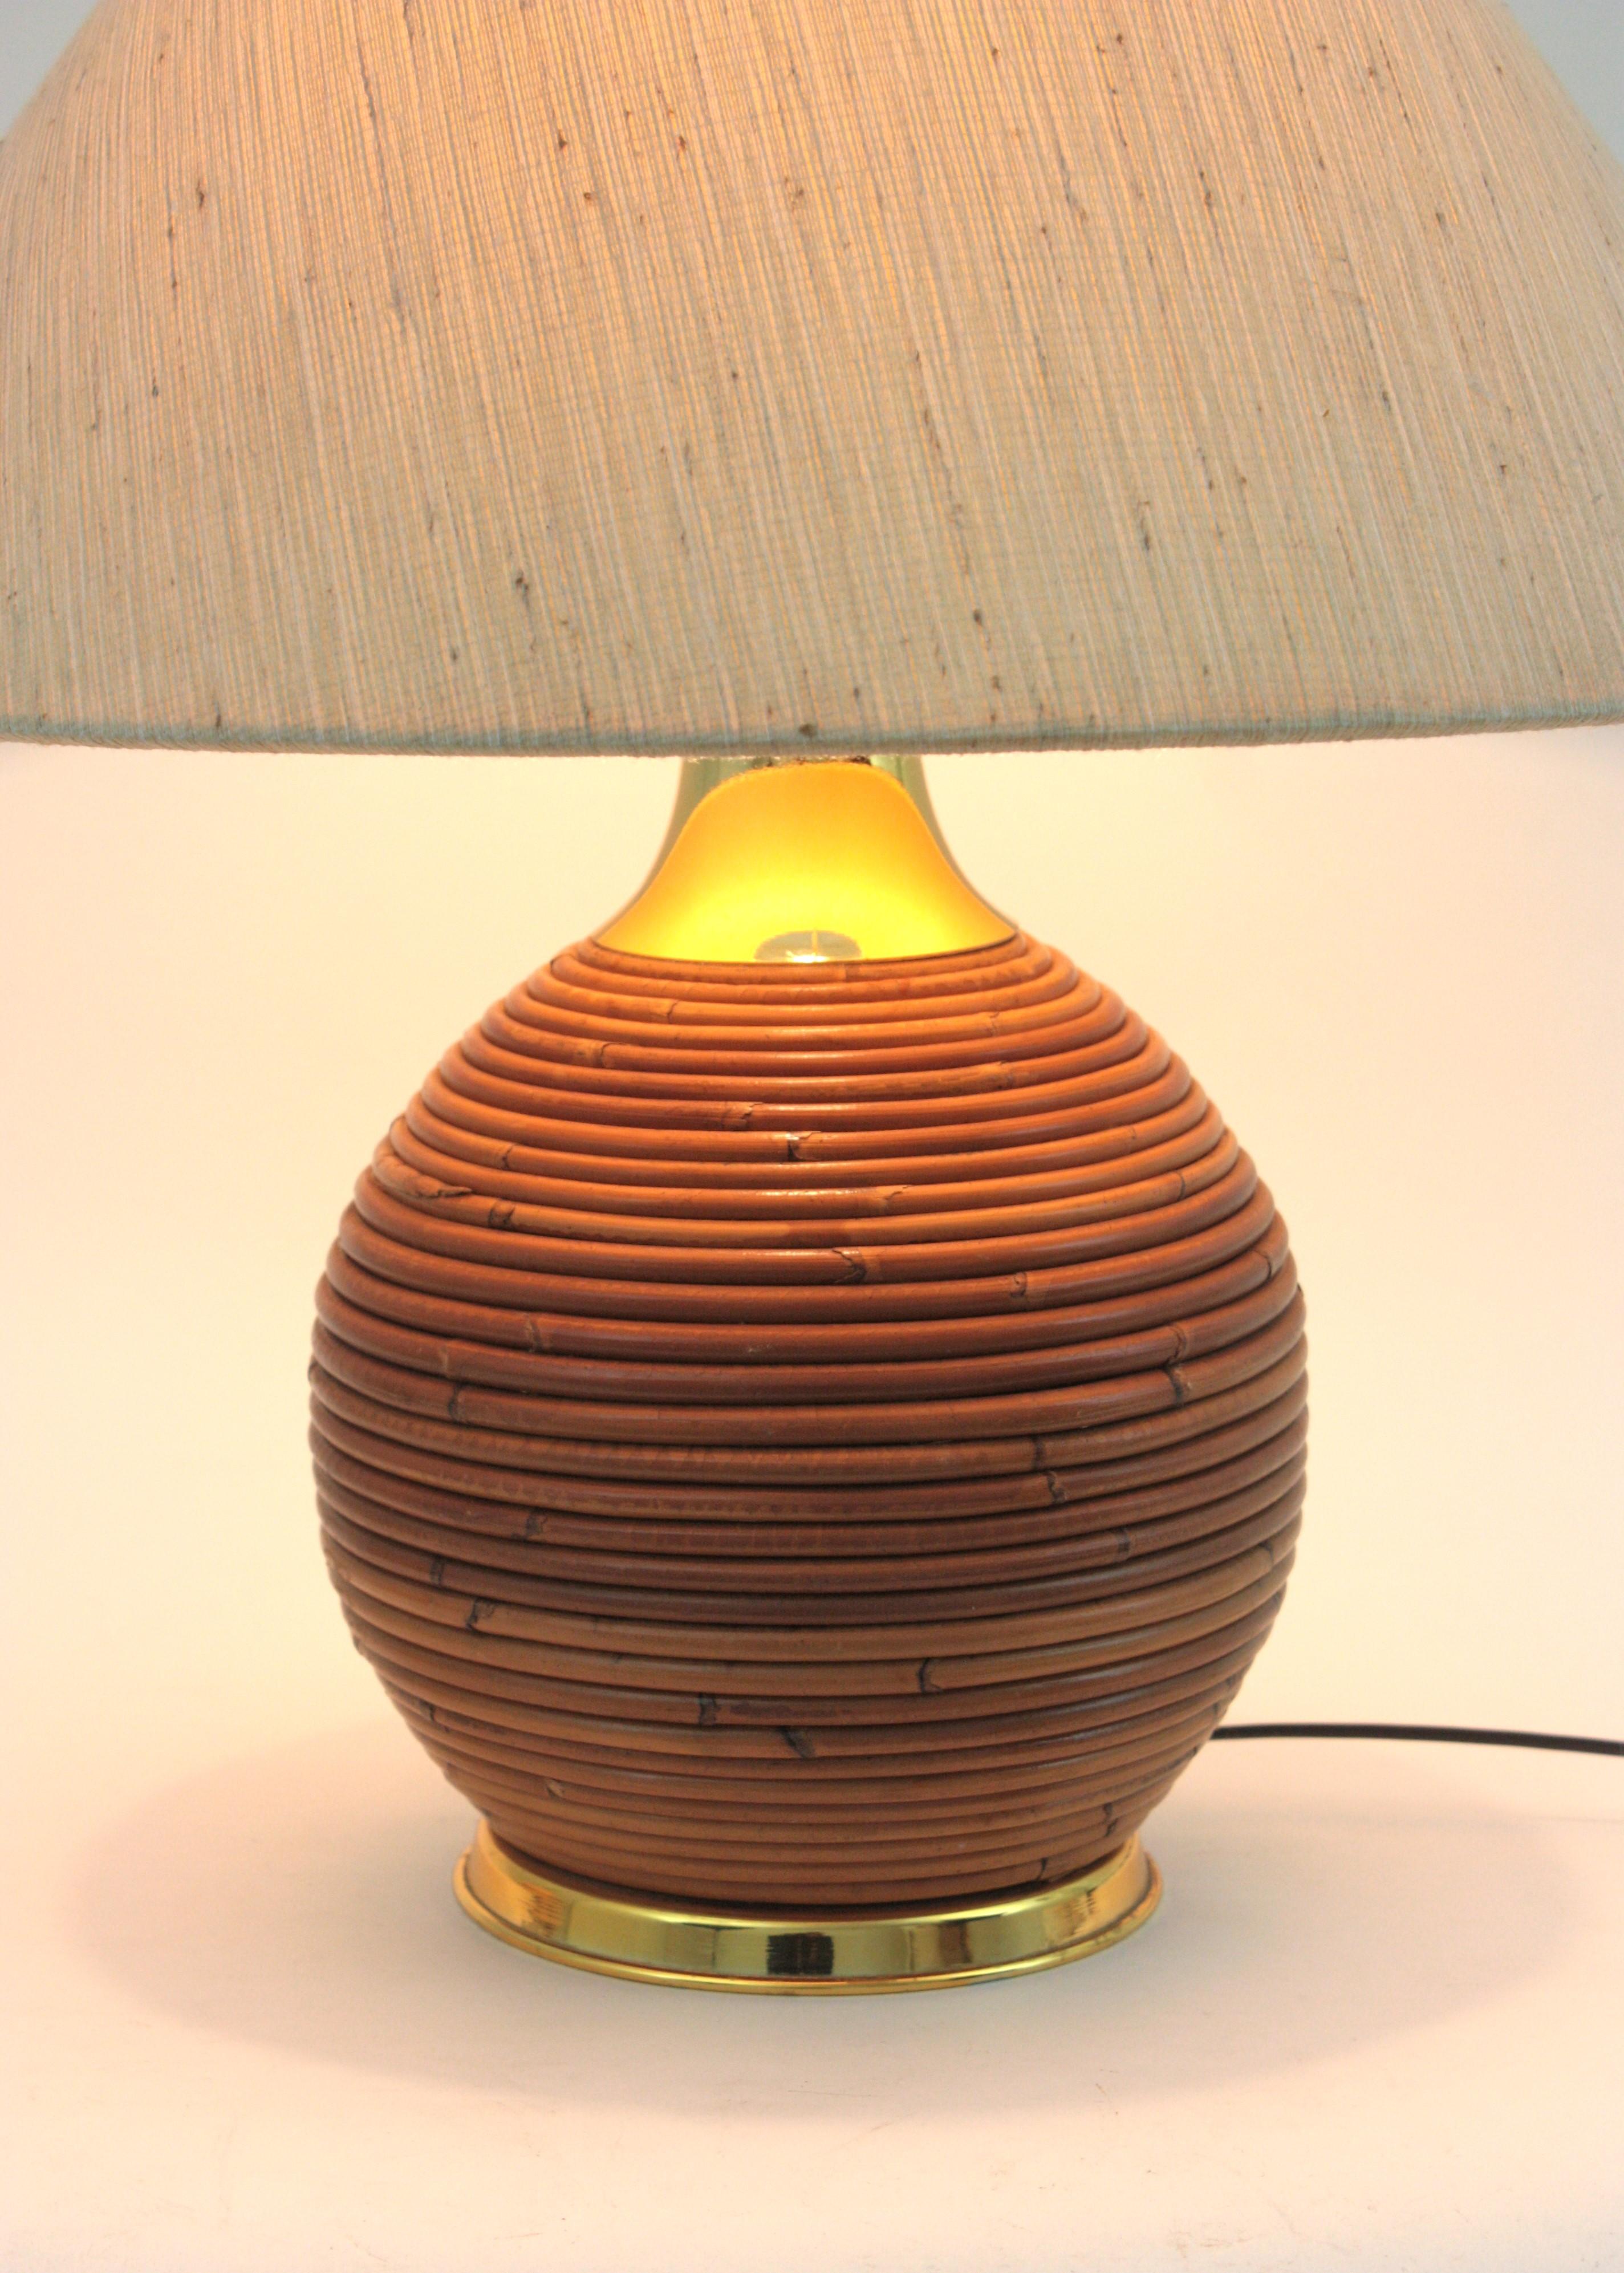 Large Italian Rattan and Brass Ball Table Lamp, 1970s For Sale 5